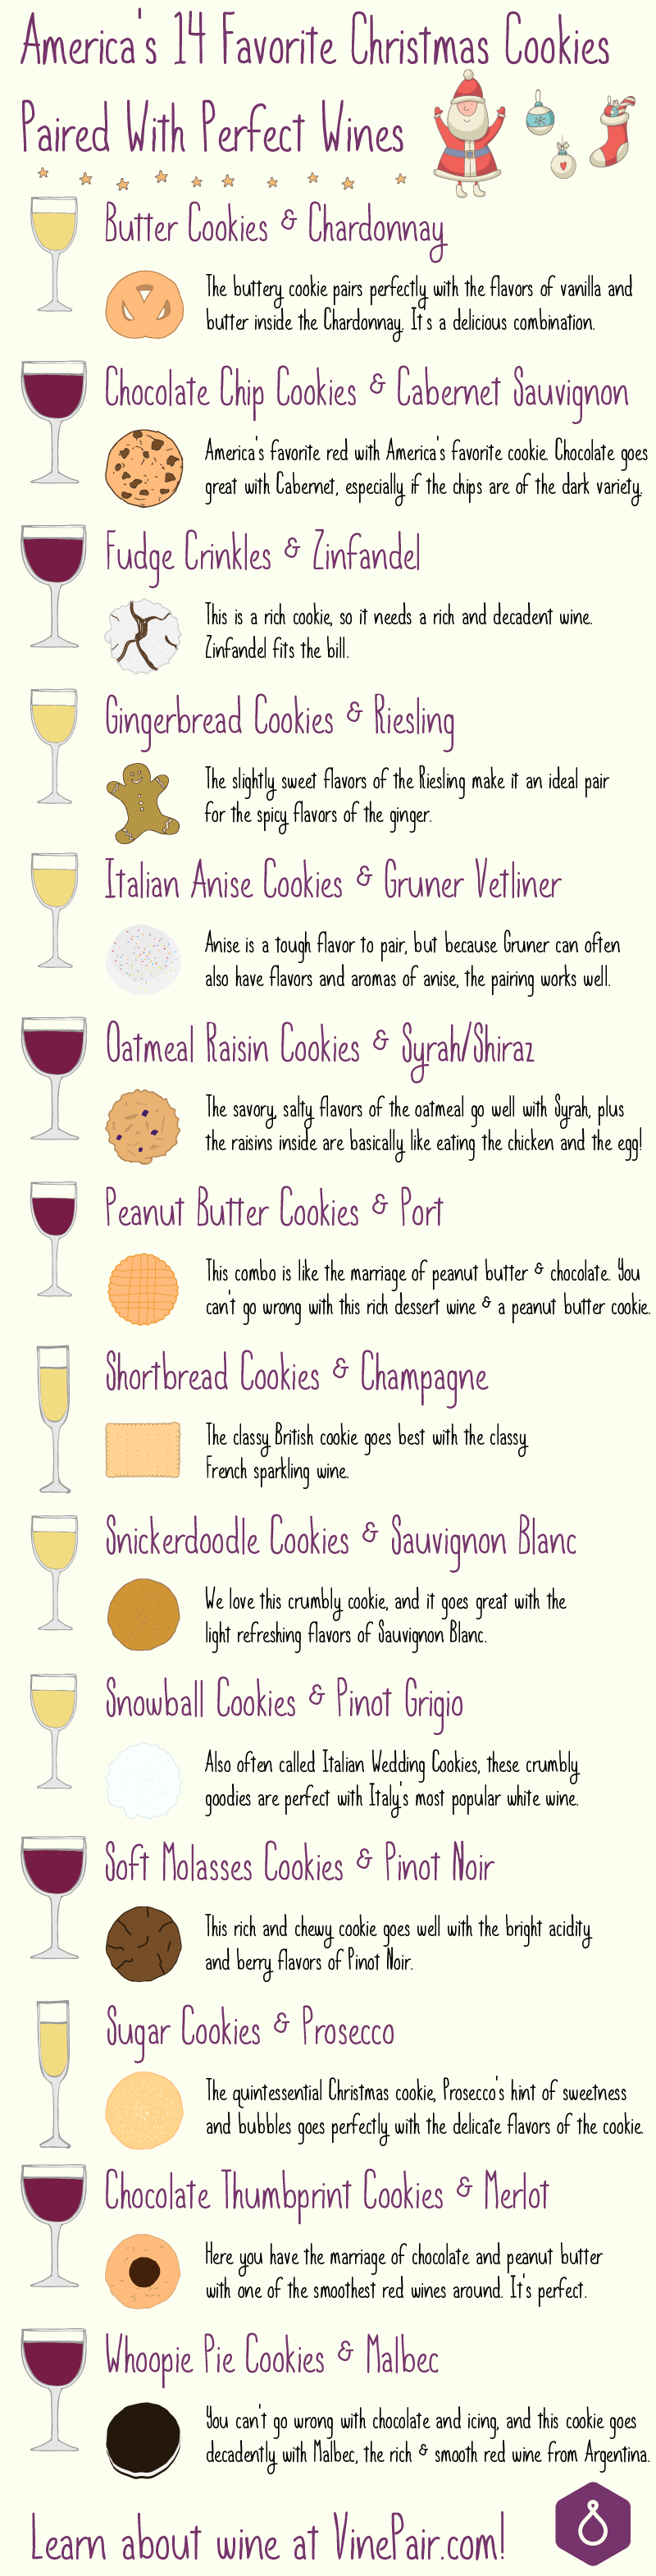 Pairing 14 Christmas Cookies With Wine - Infographic